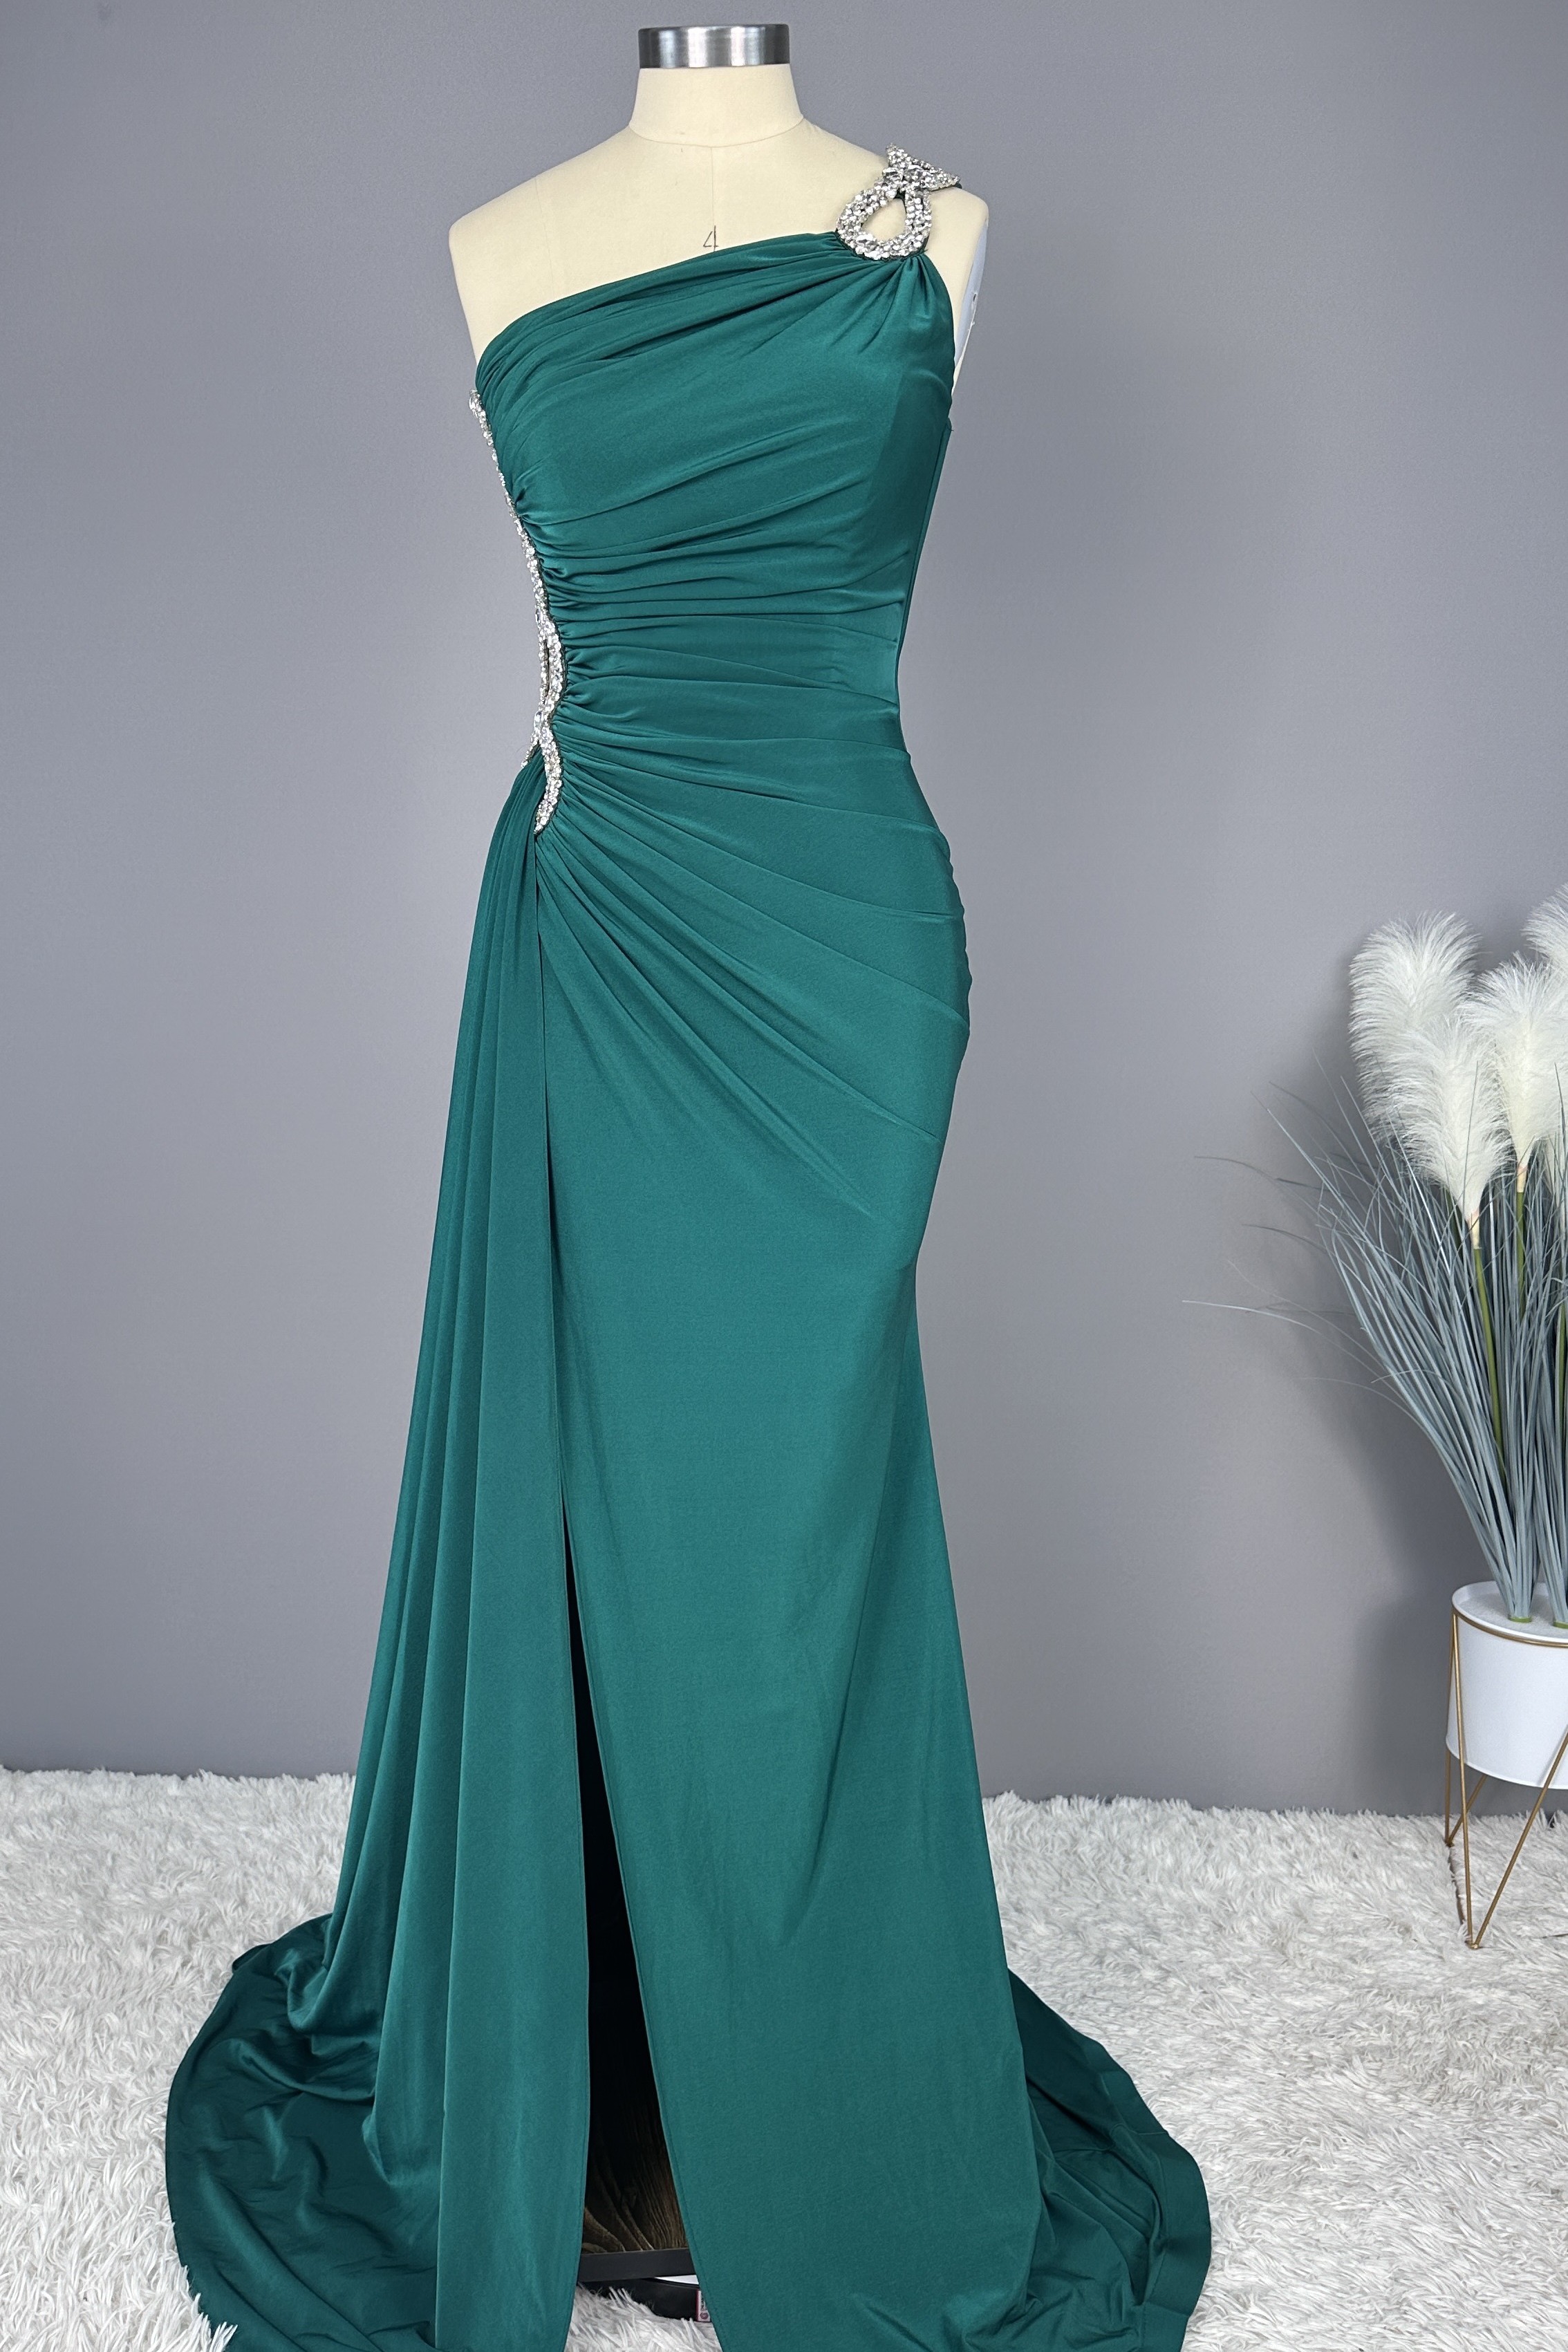 Shop 2020 Emerald Green Long Strapless Backless Prom Dresses with Pocket  under 120